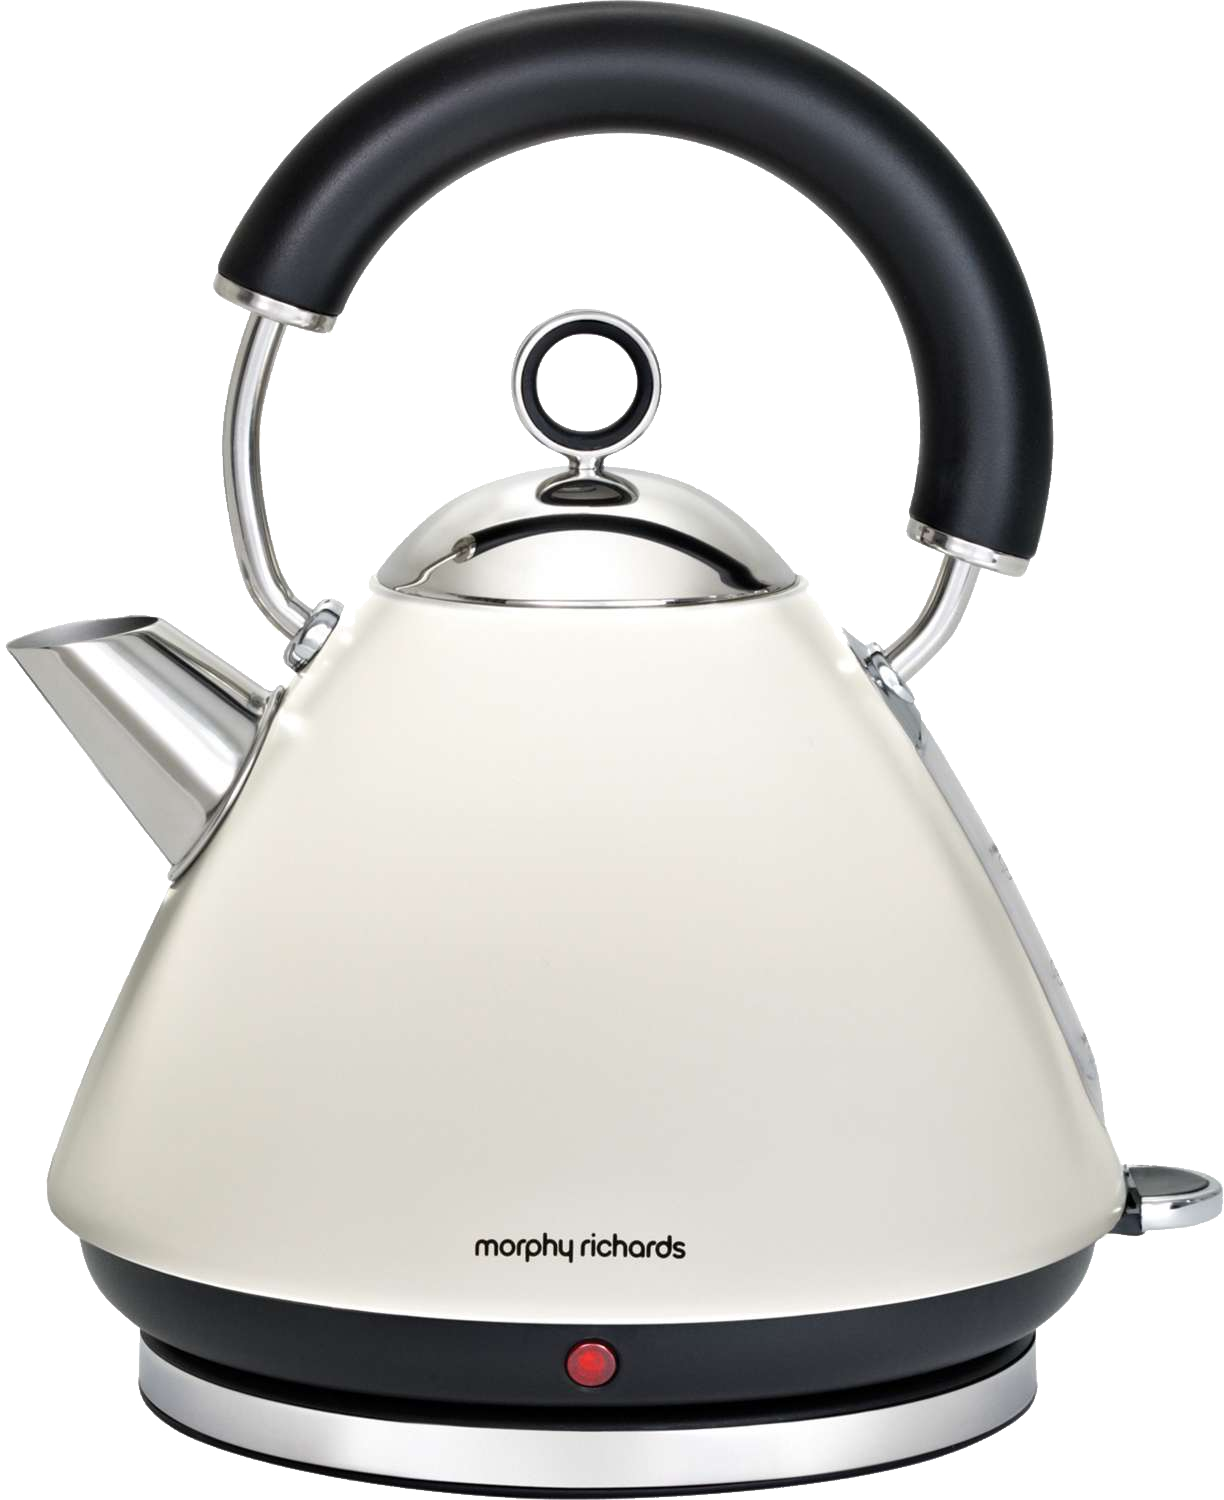 Kettle PNG image